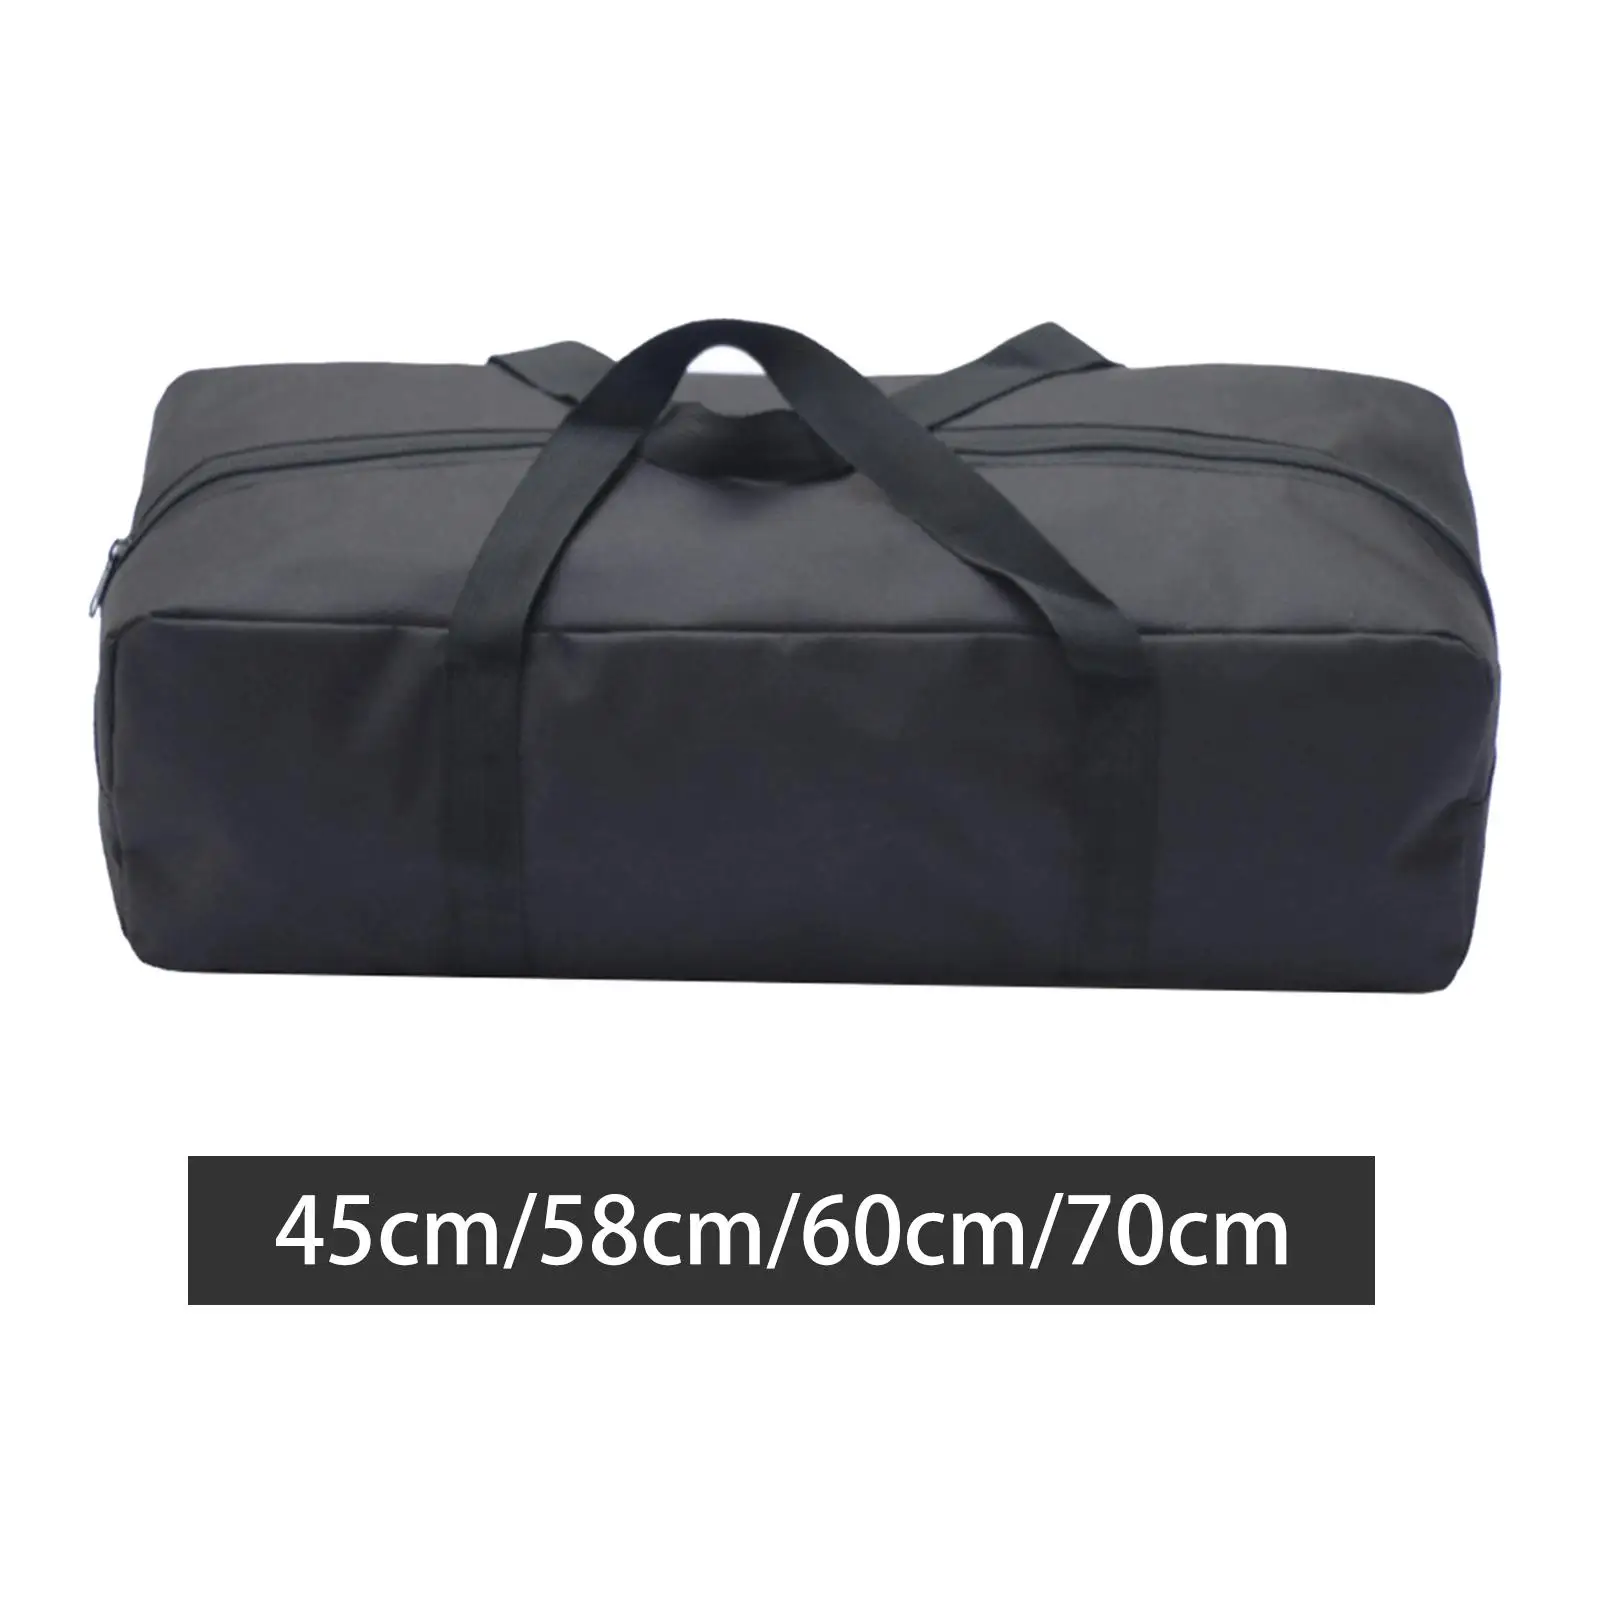 Grill Storage Bag Thicken Oxford Cloth Fittings Wear Resistant for Camp Barbecue